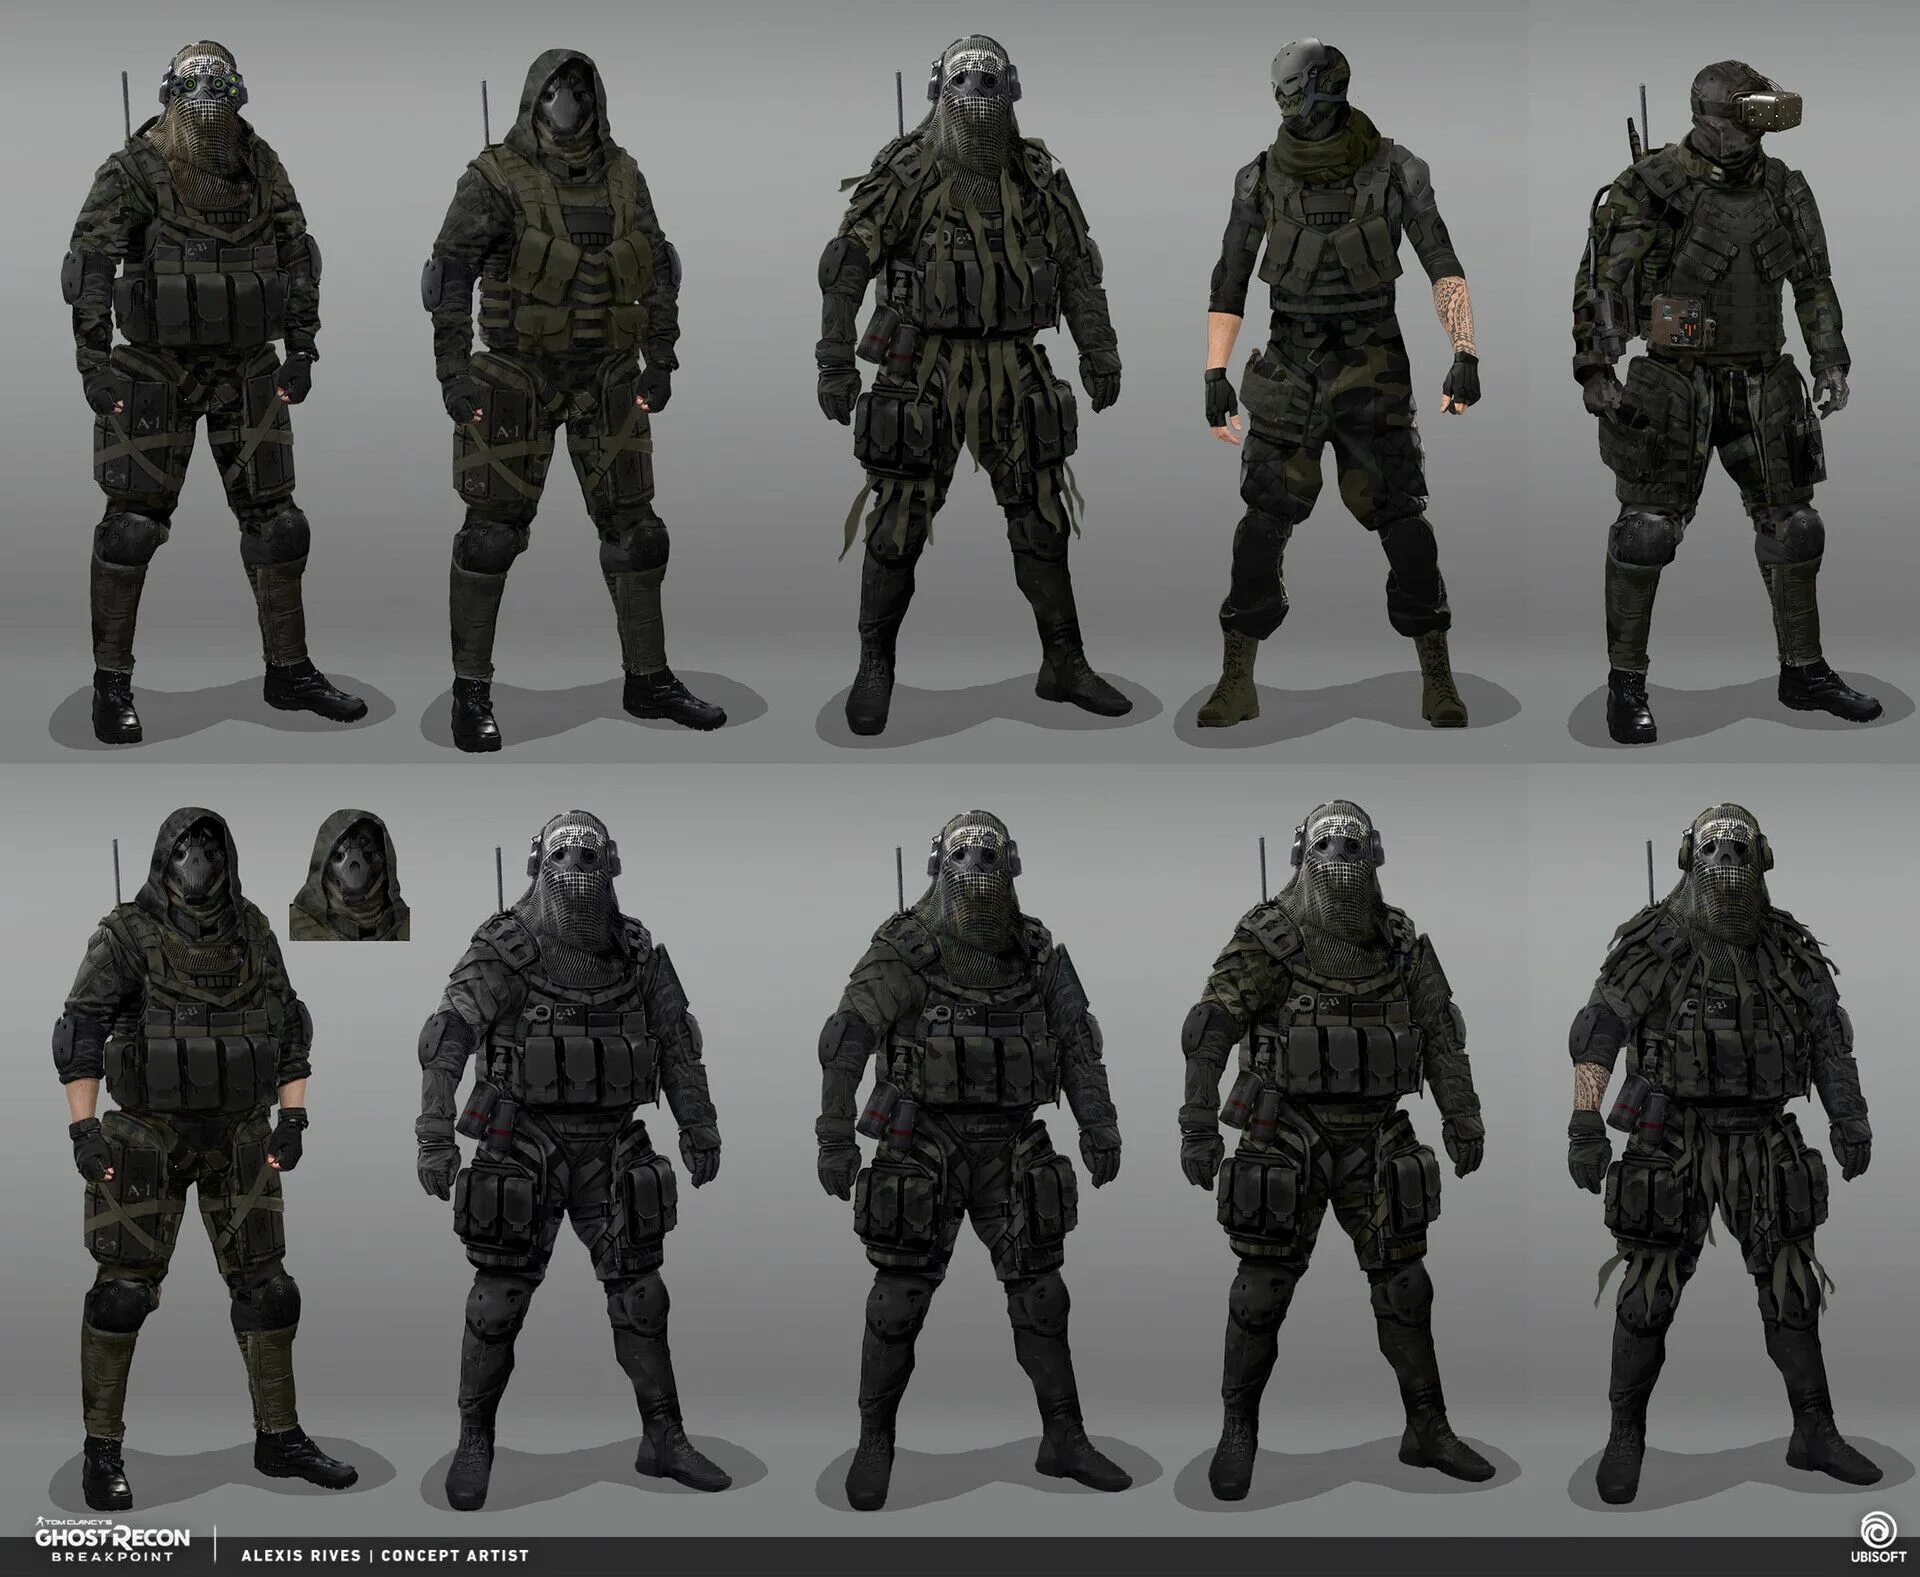 Future units. Ghost Recon breakpoint костюмы. Ghost Recon breakpoint волки. Гоуст Рекон брейкпоинт. Ghost Recon breakpoint солдаты.